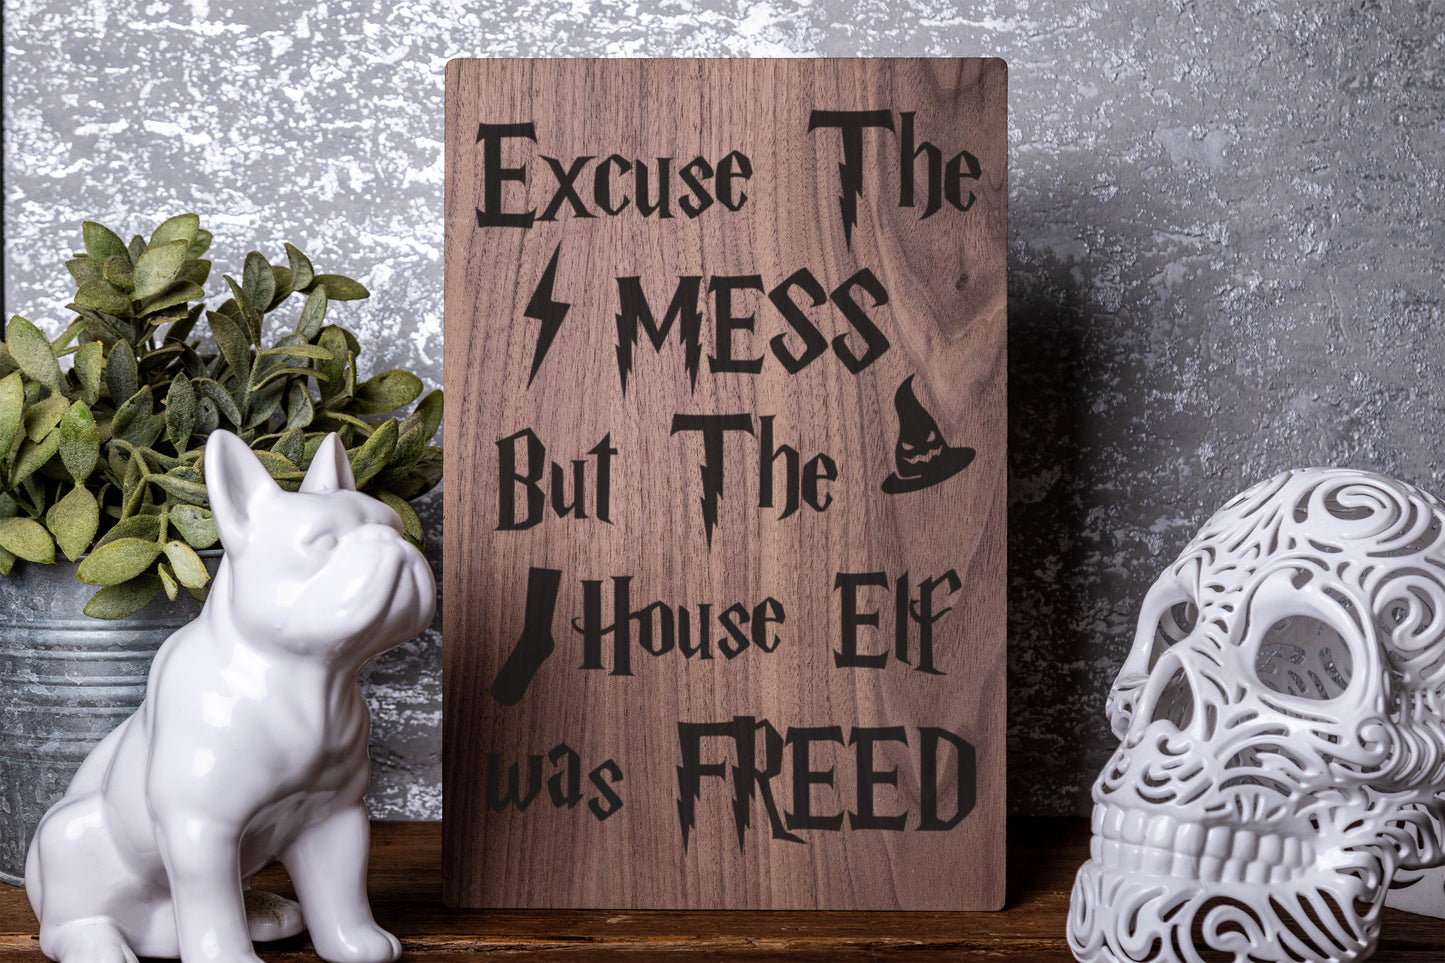 Excuse The Mess But The House Elf Was Freed Laser Engraved Wood Board